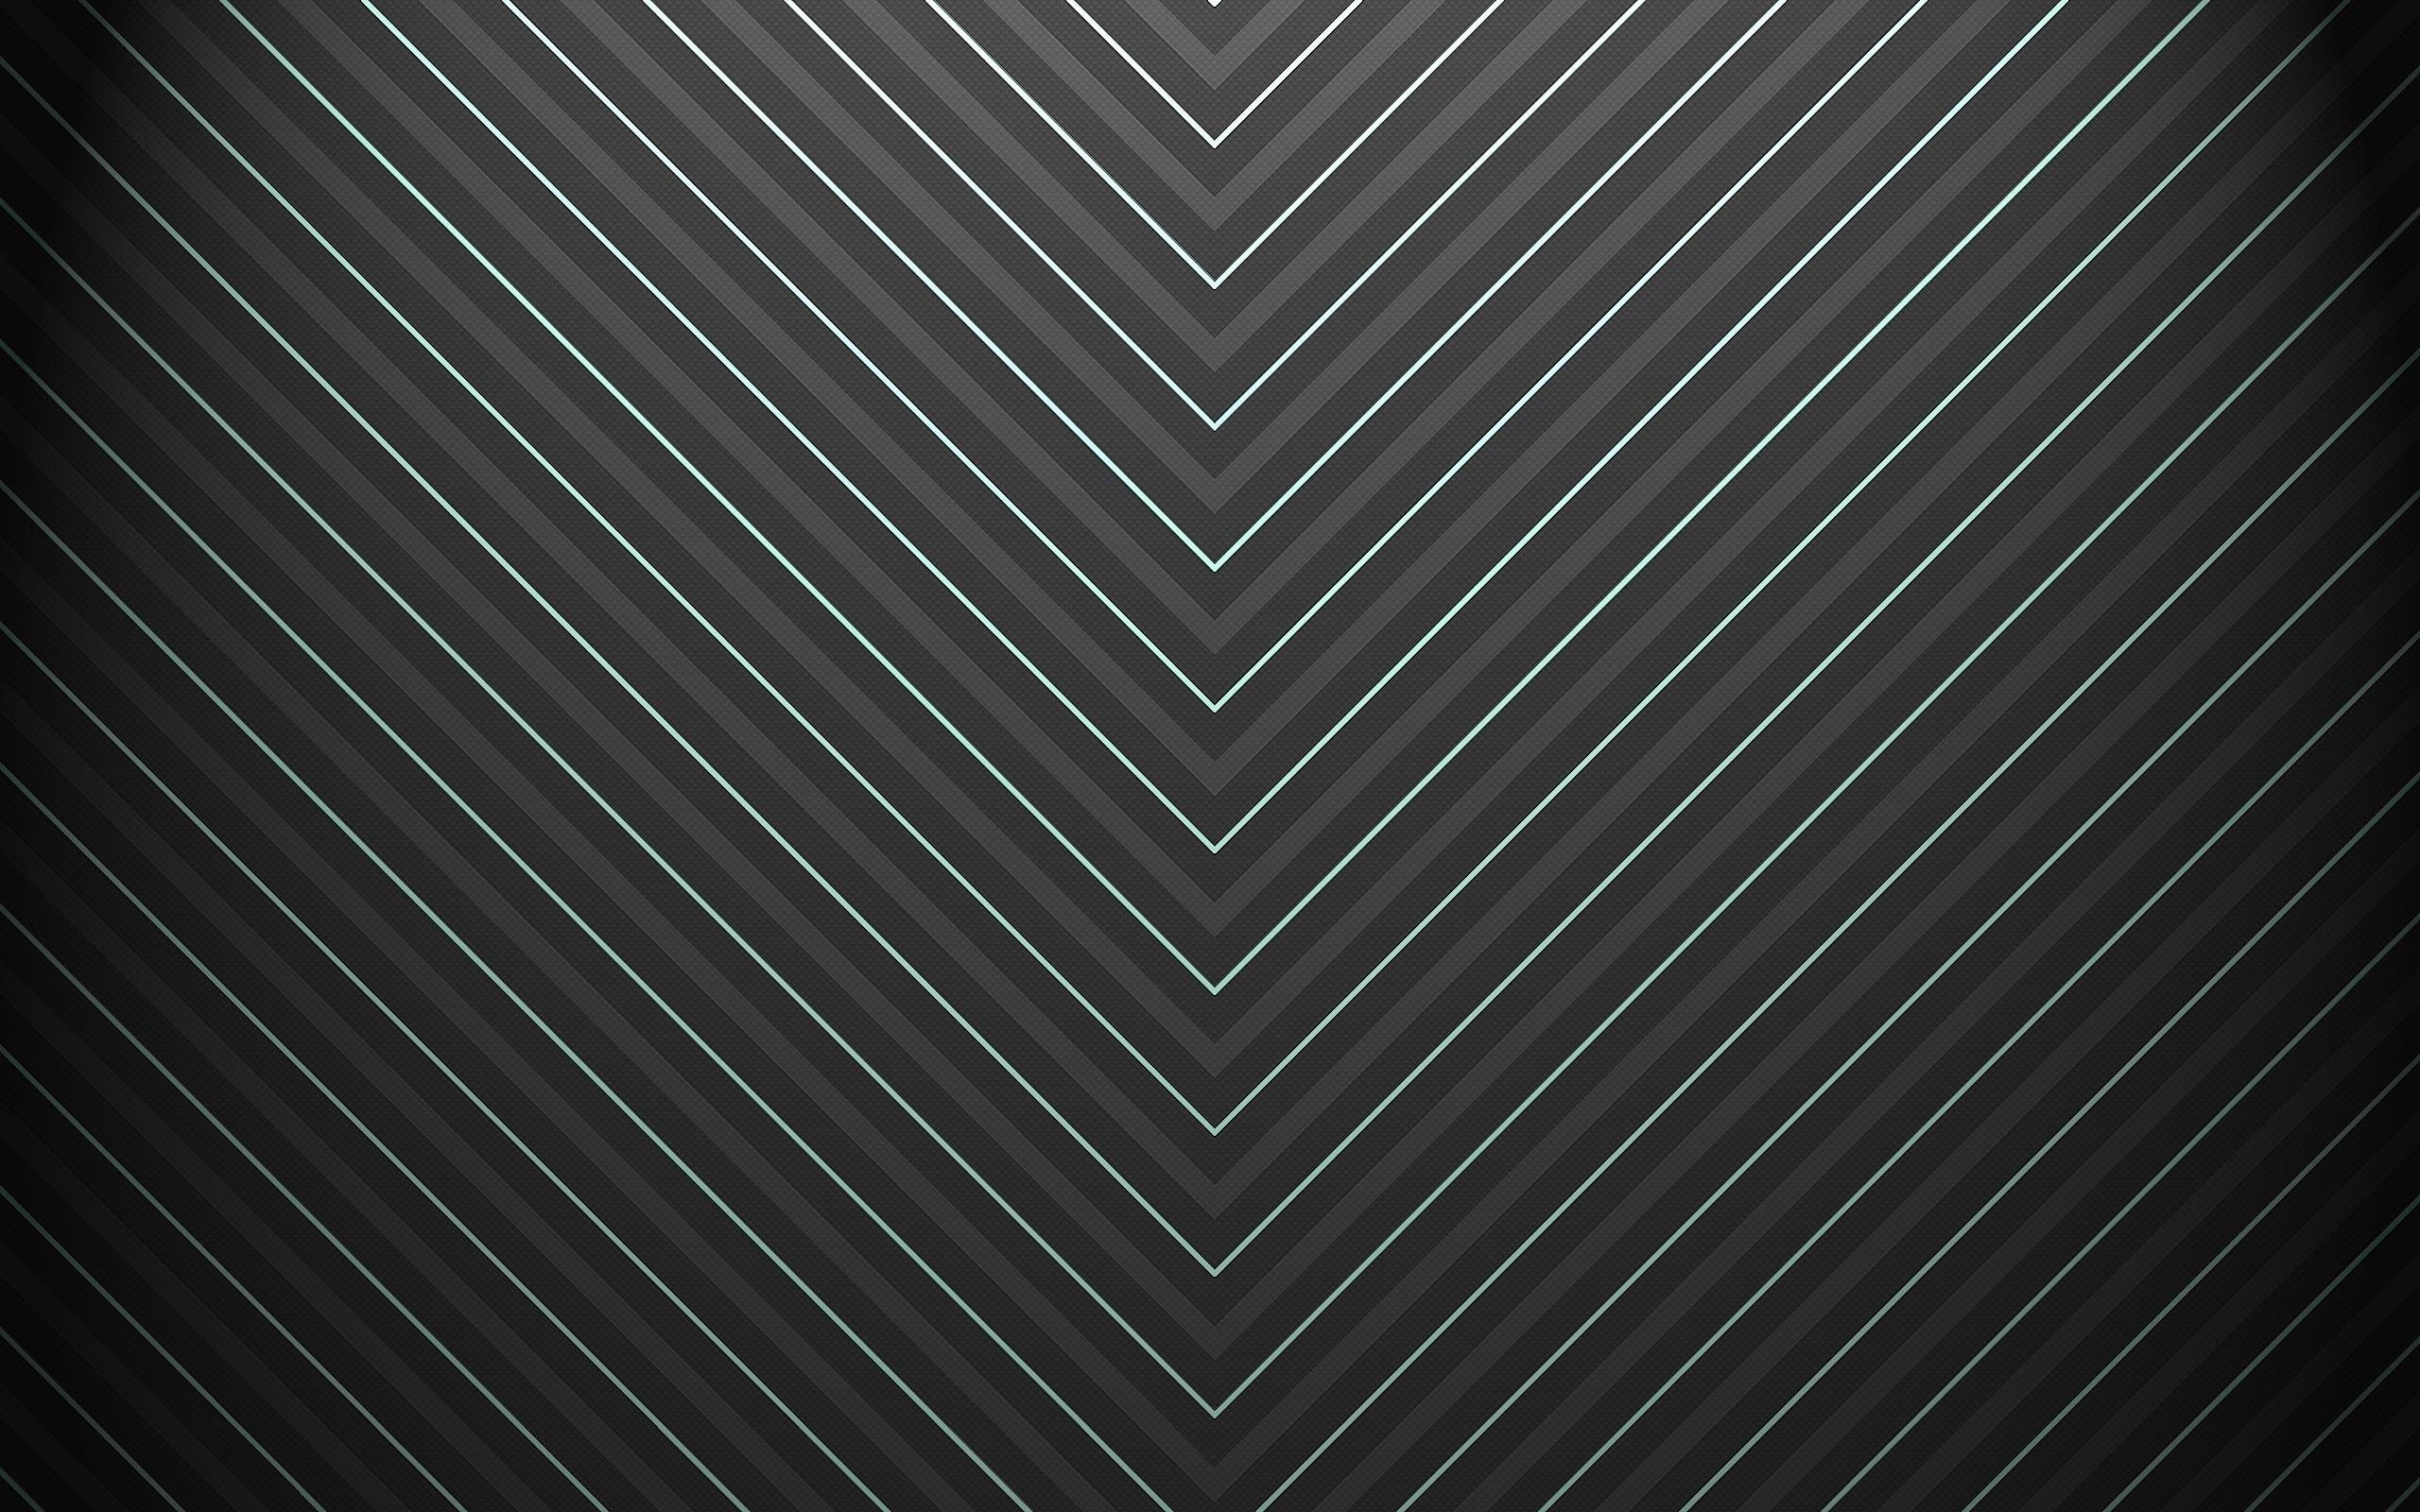 2560x1600 Title : black and gray backgrounds Â·â . Dimension : 2560 x 1600. File Type :  JPG/JPEG